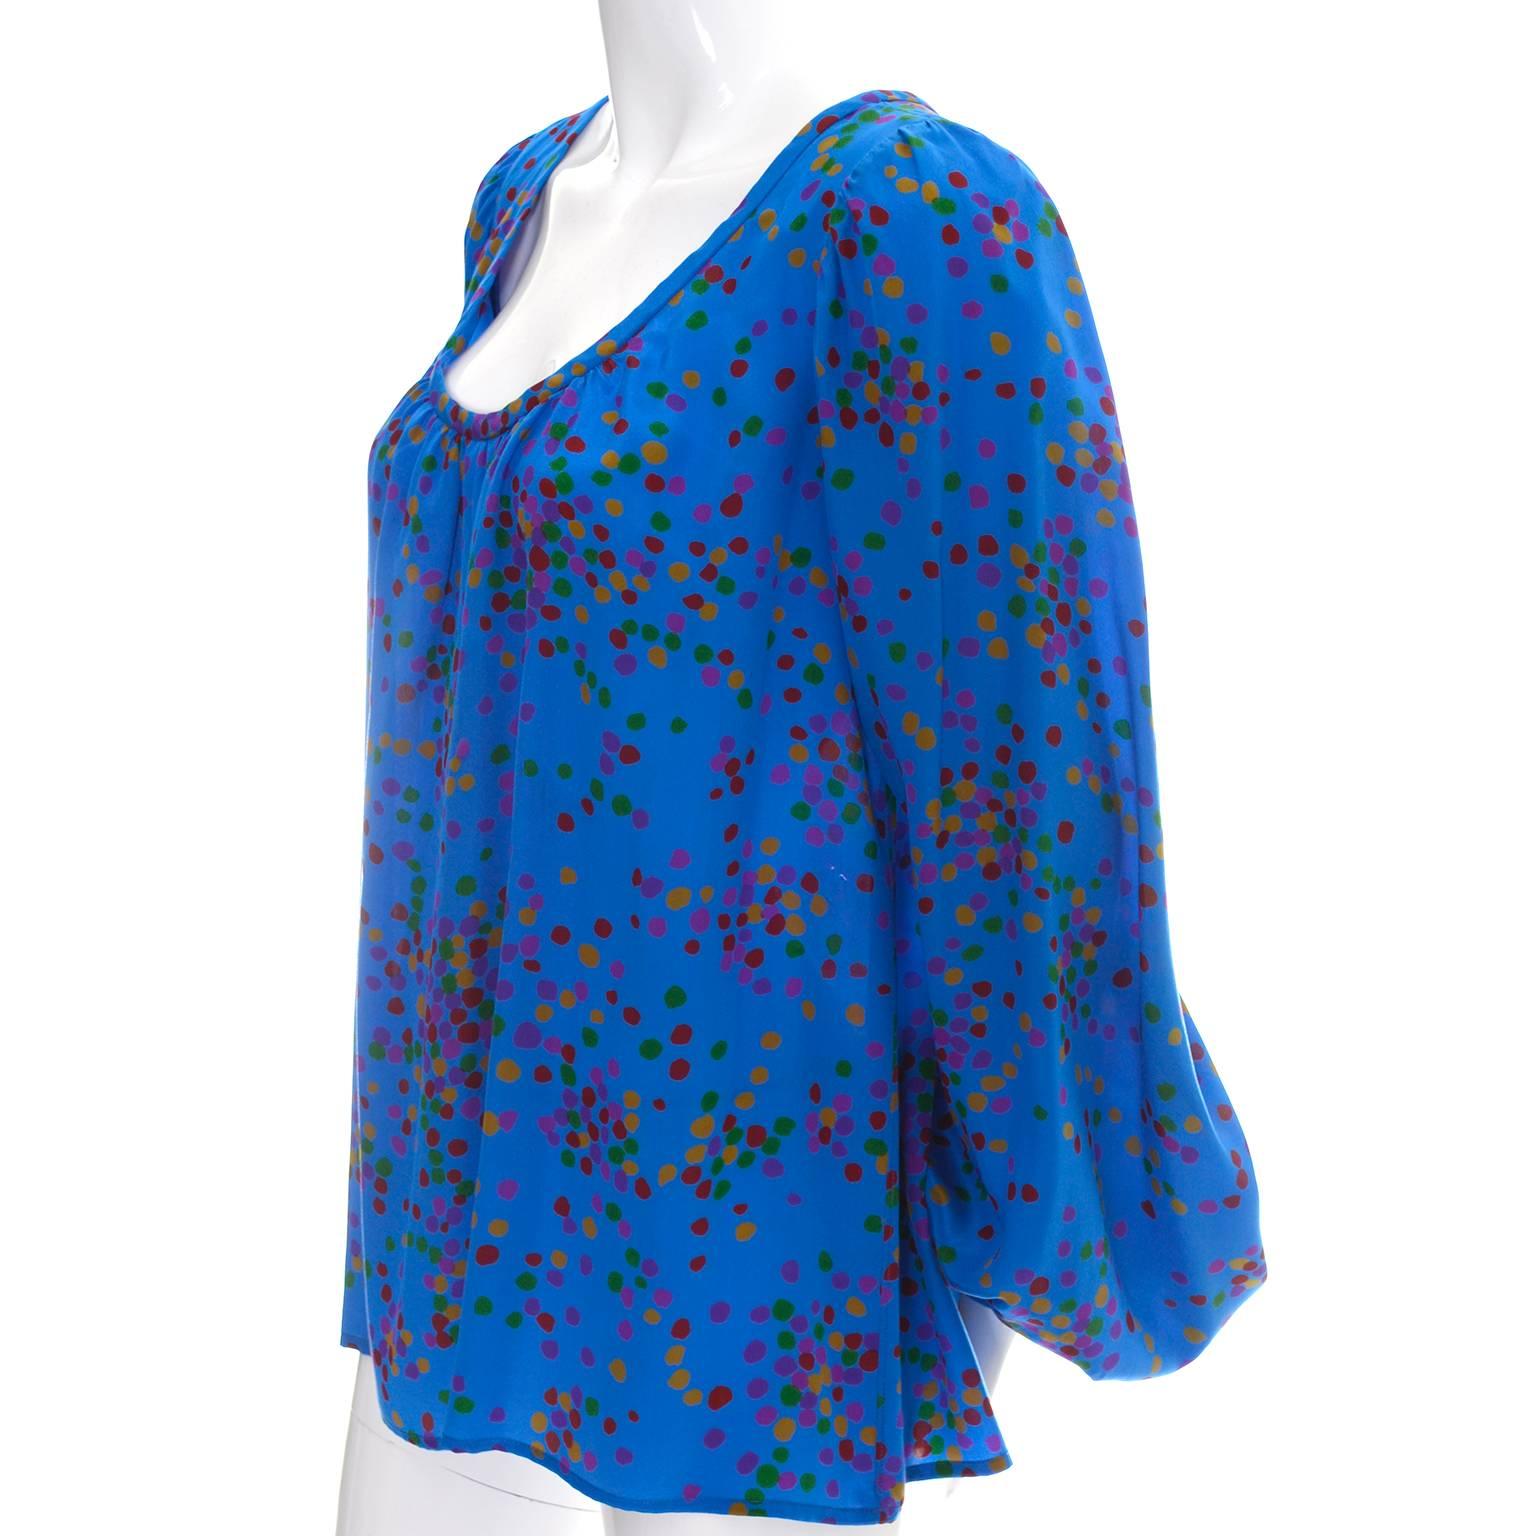 This beautiful YSL Rive Gauche vintage blue silk blouse has multi colored polka dots and bishop sleeves. This piece was designed in the late 1970's by Yves Saint Laurent and is a peasant style top, meant to be worn loosely fitted.  This top is in